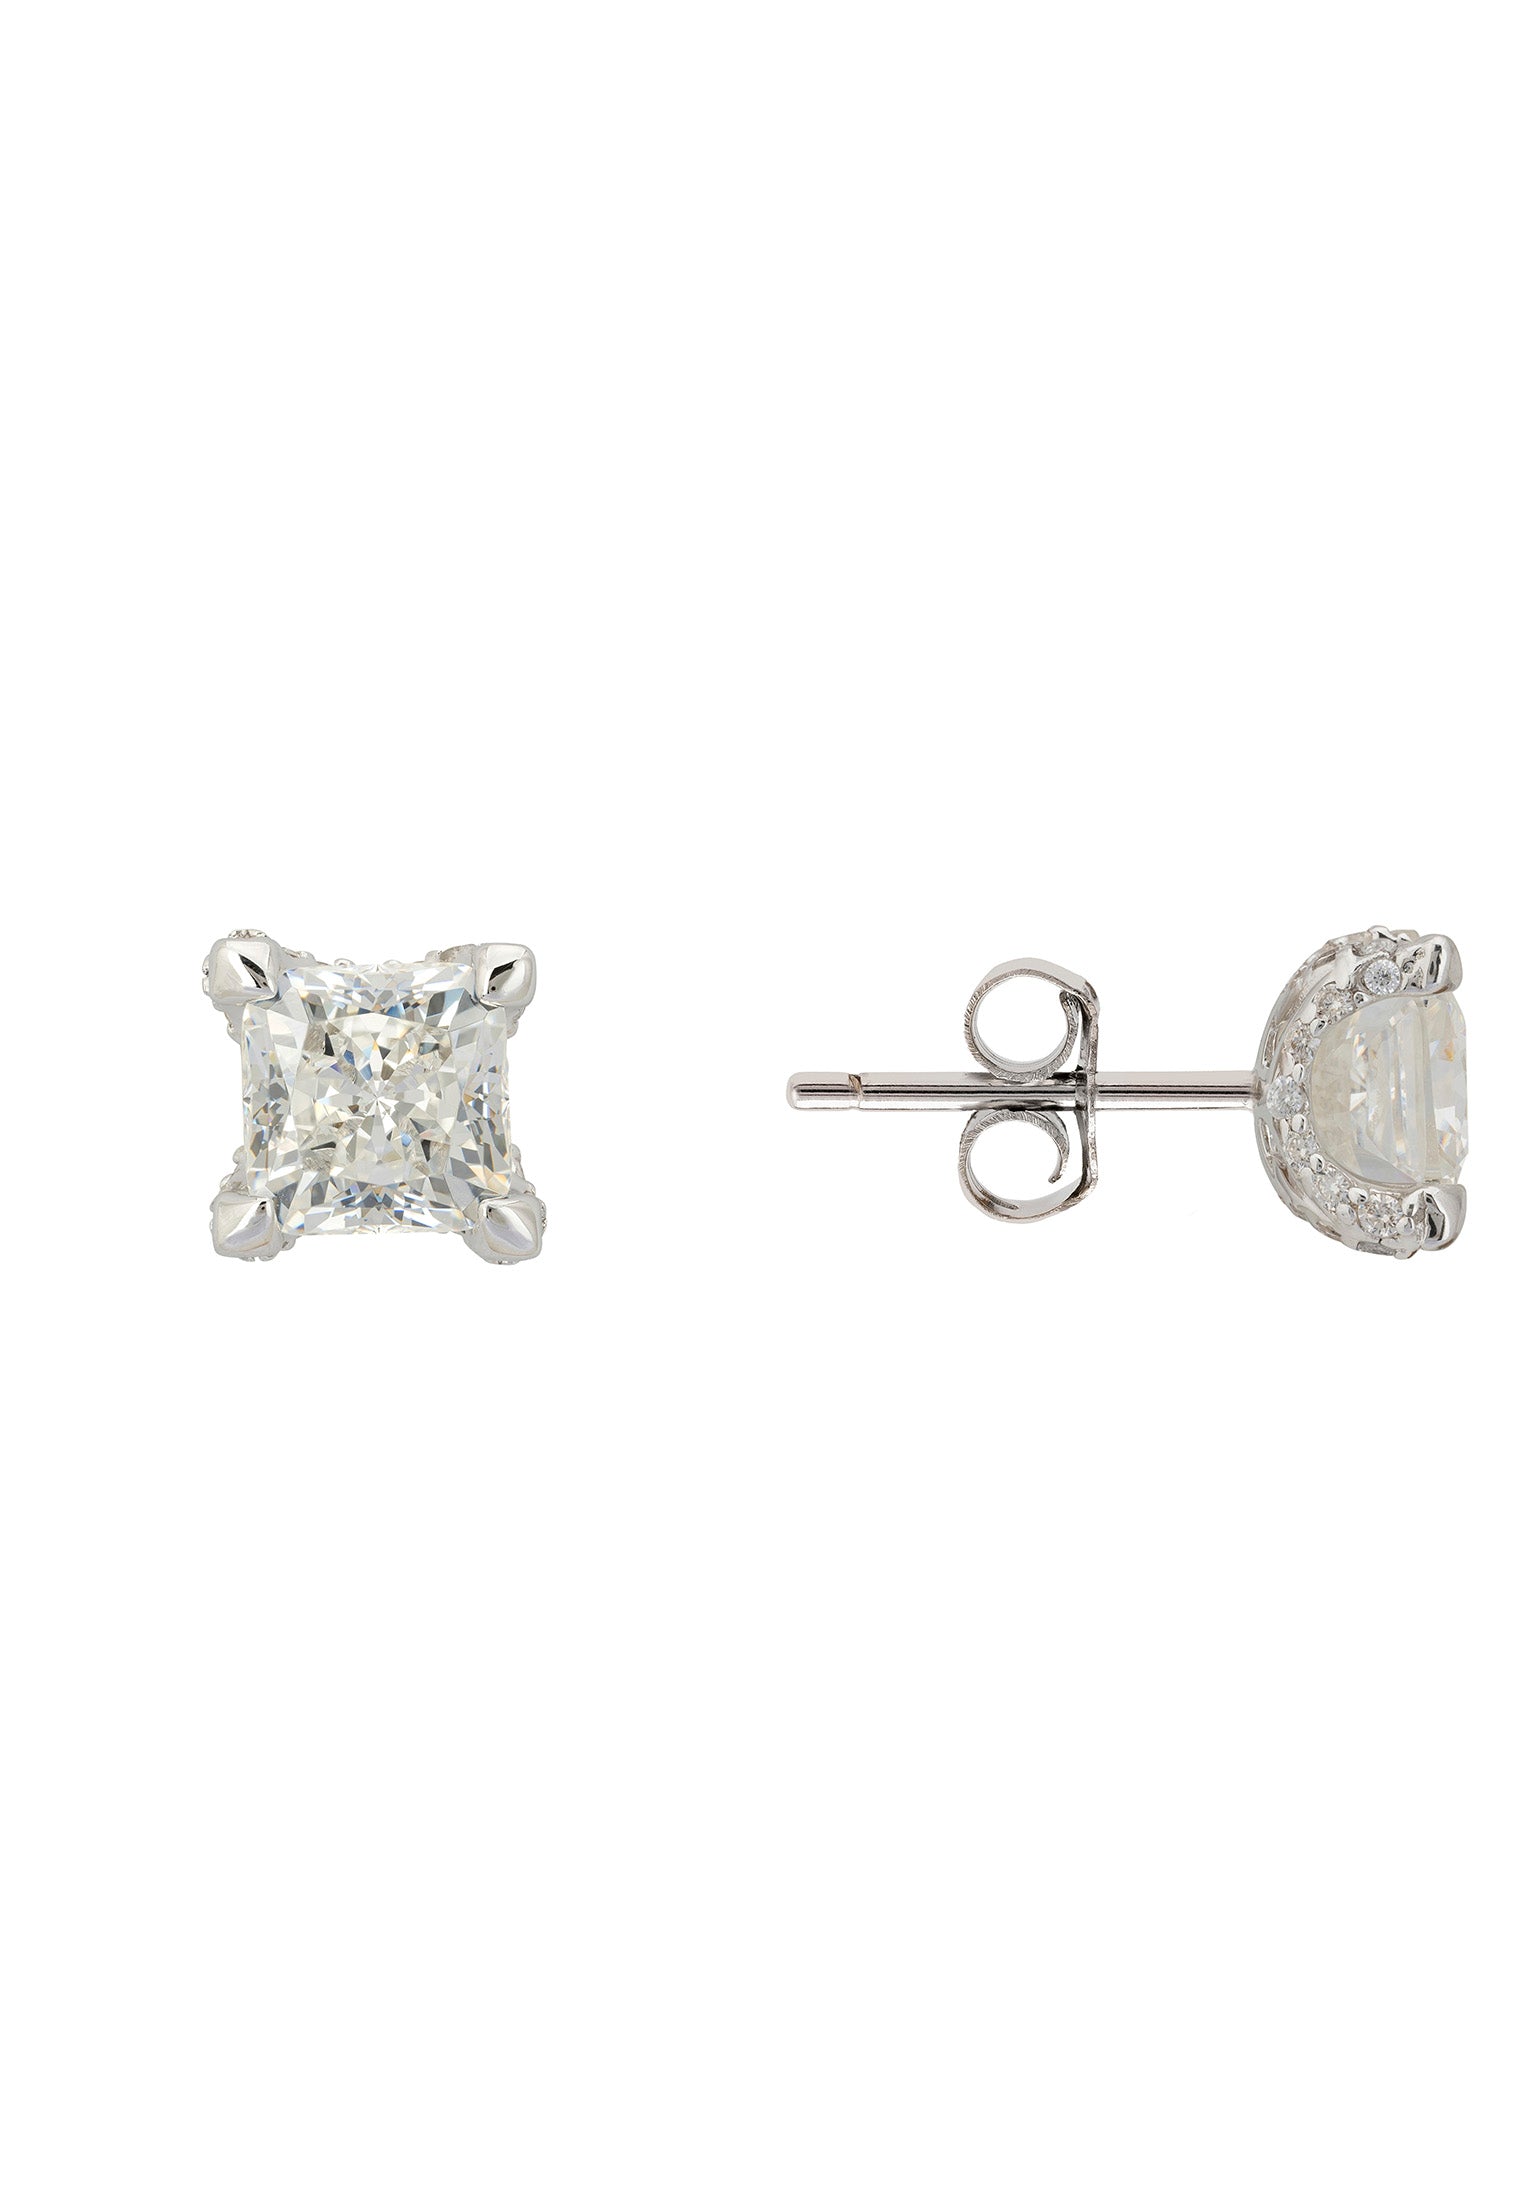 Bel Air Square-Cut Solitaire Moissanite Stud Earrings Silver